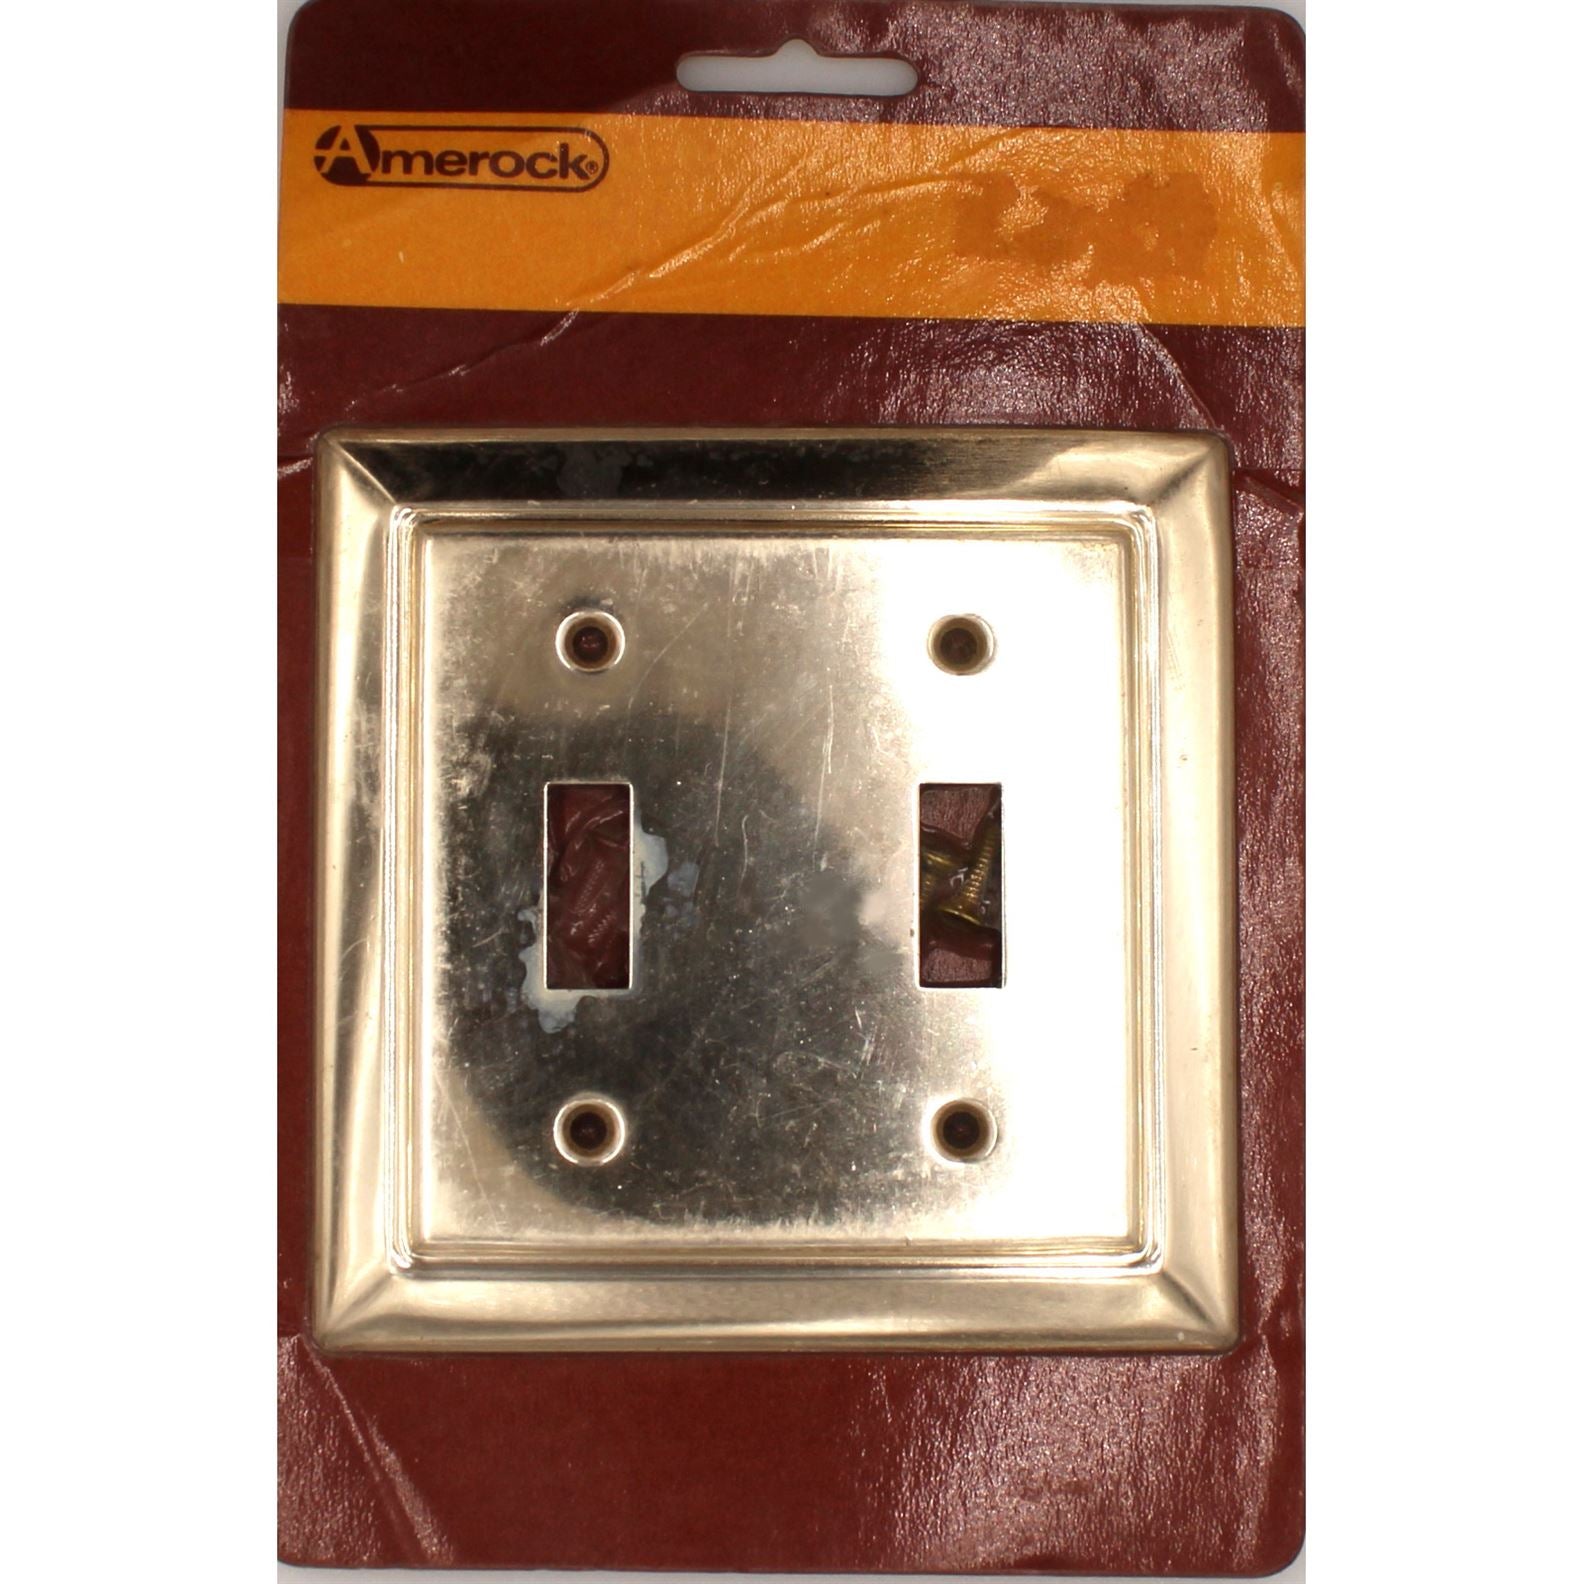 Amerock Accents Polished Brass 2 Toggle Light Switch Wall Plate C4384-3